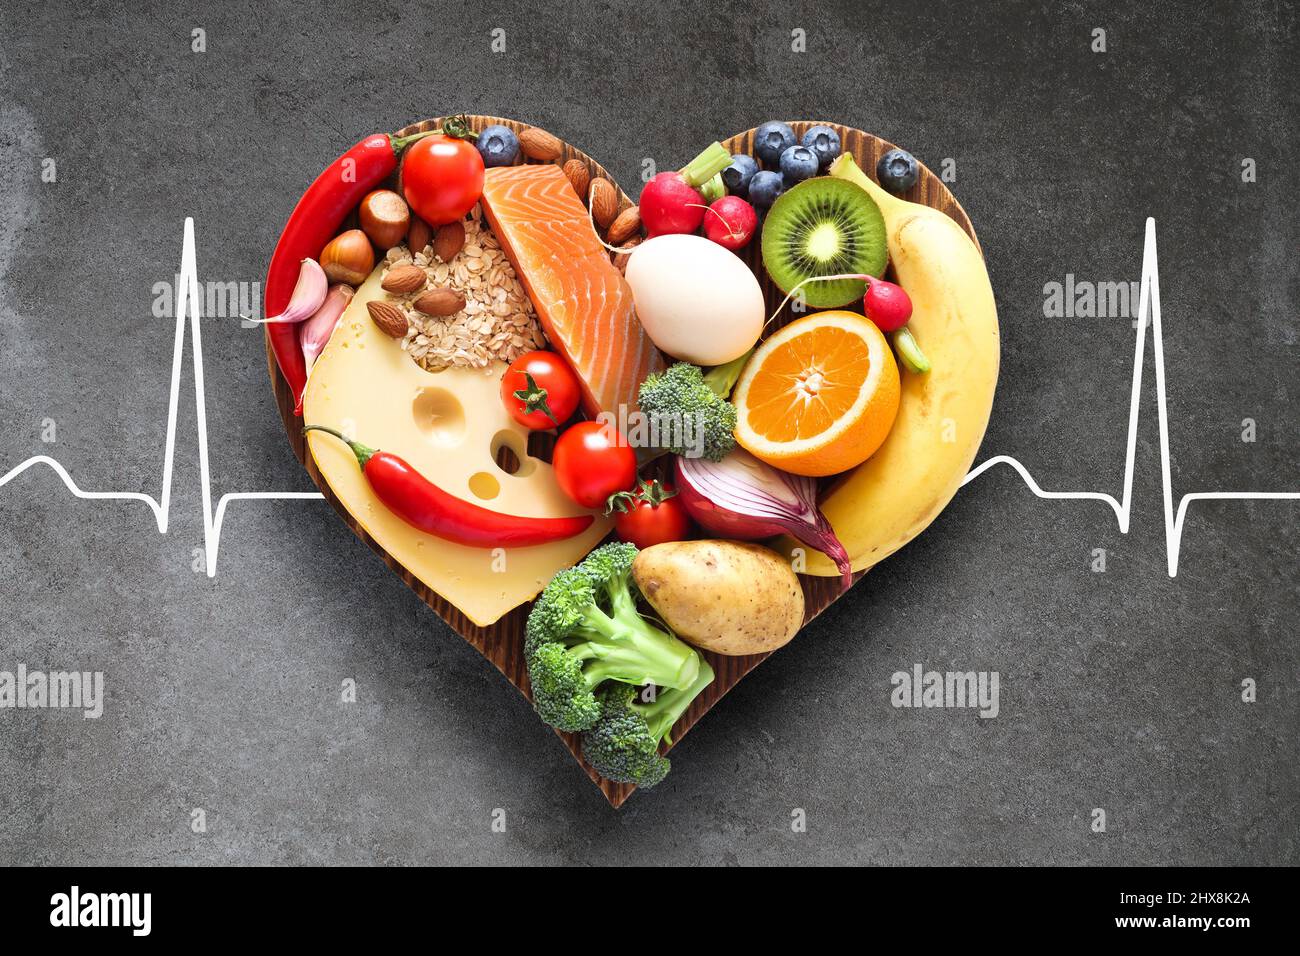 Nutrition Plays a Vital Role in Good Health